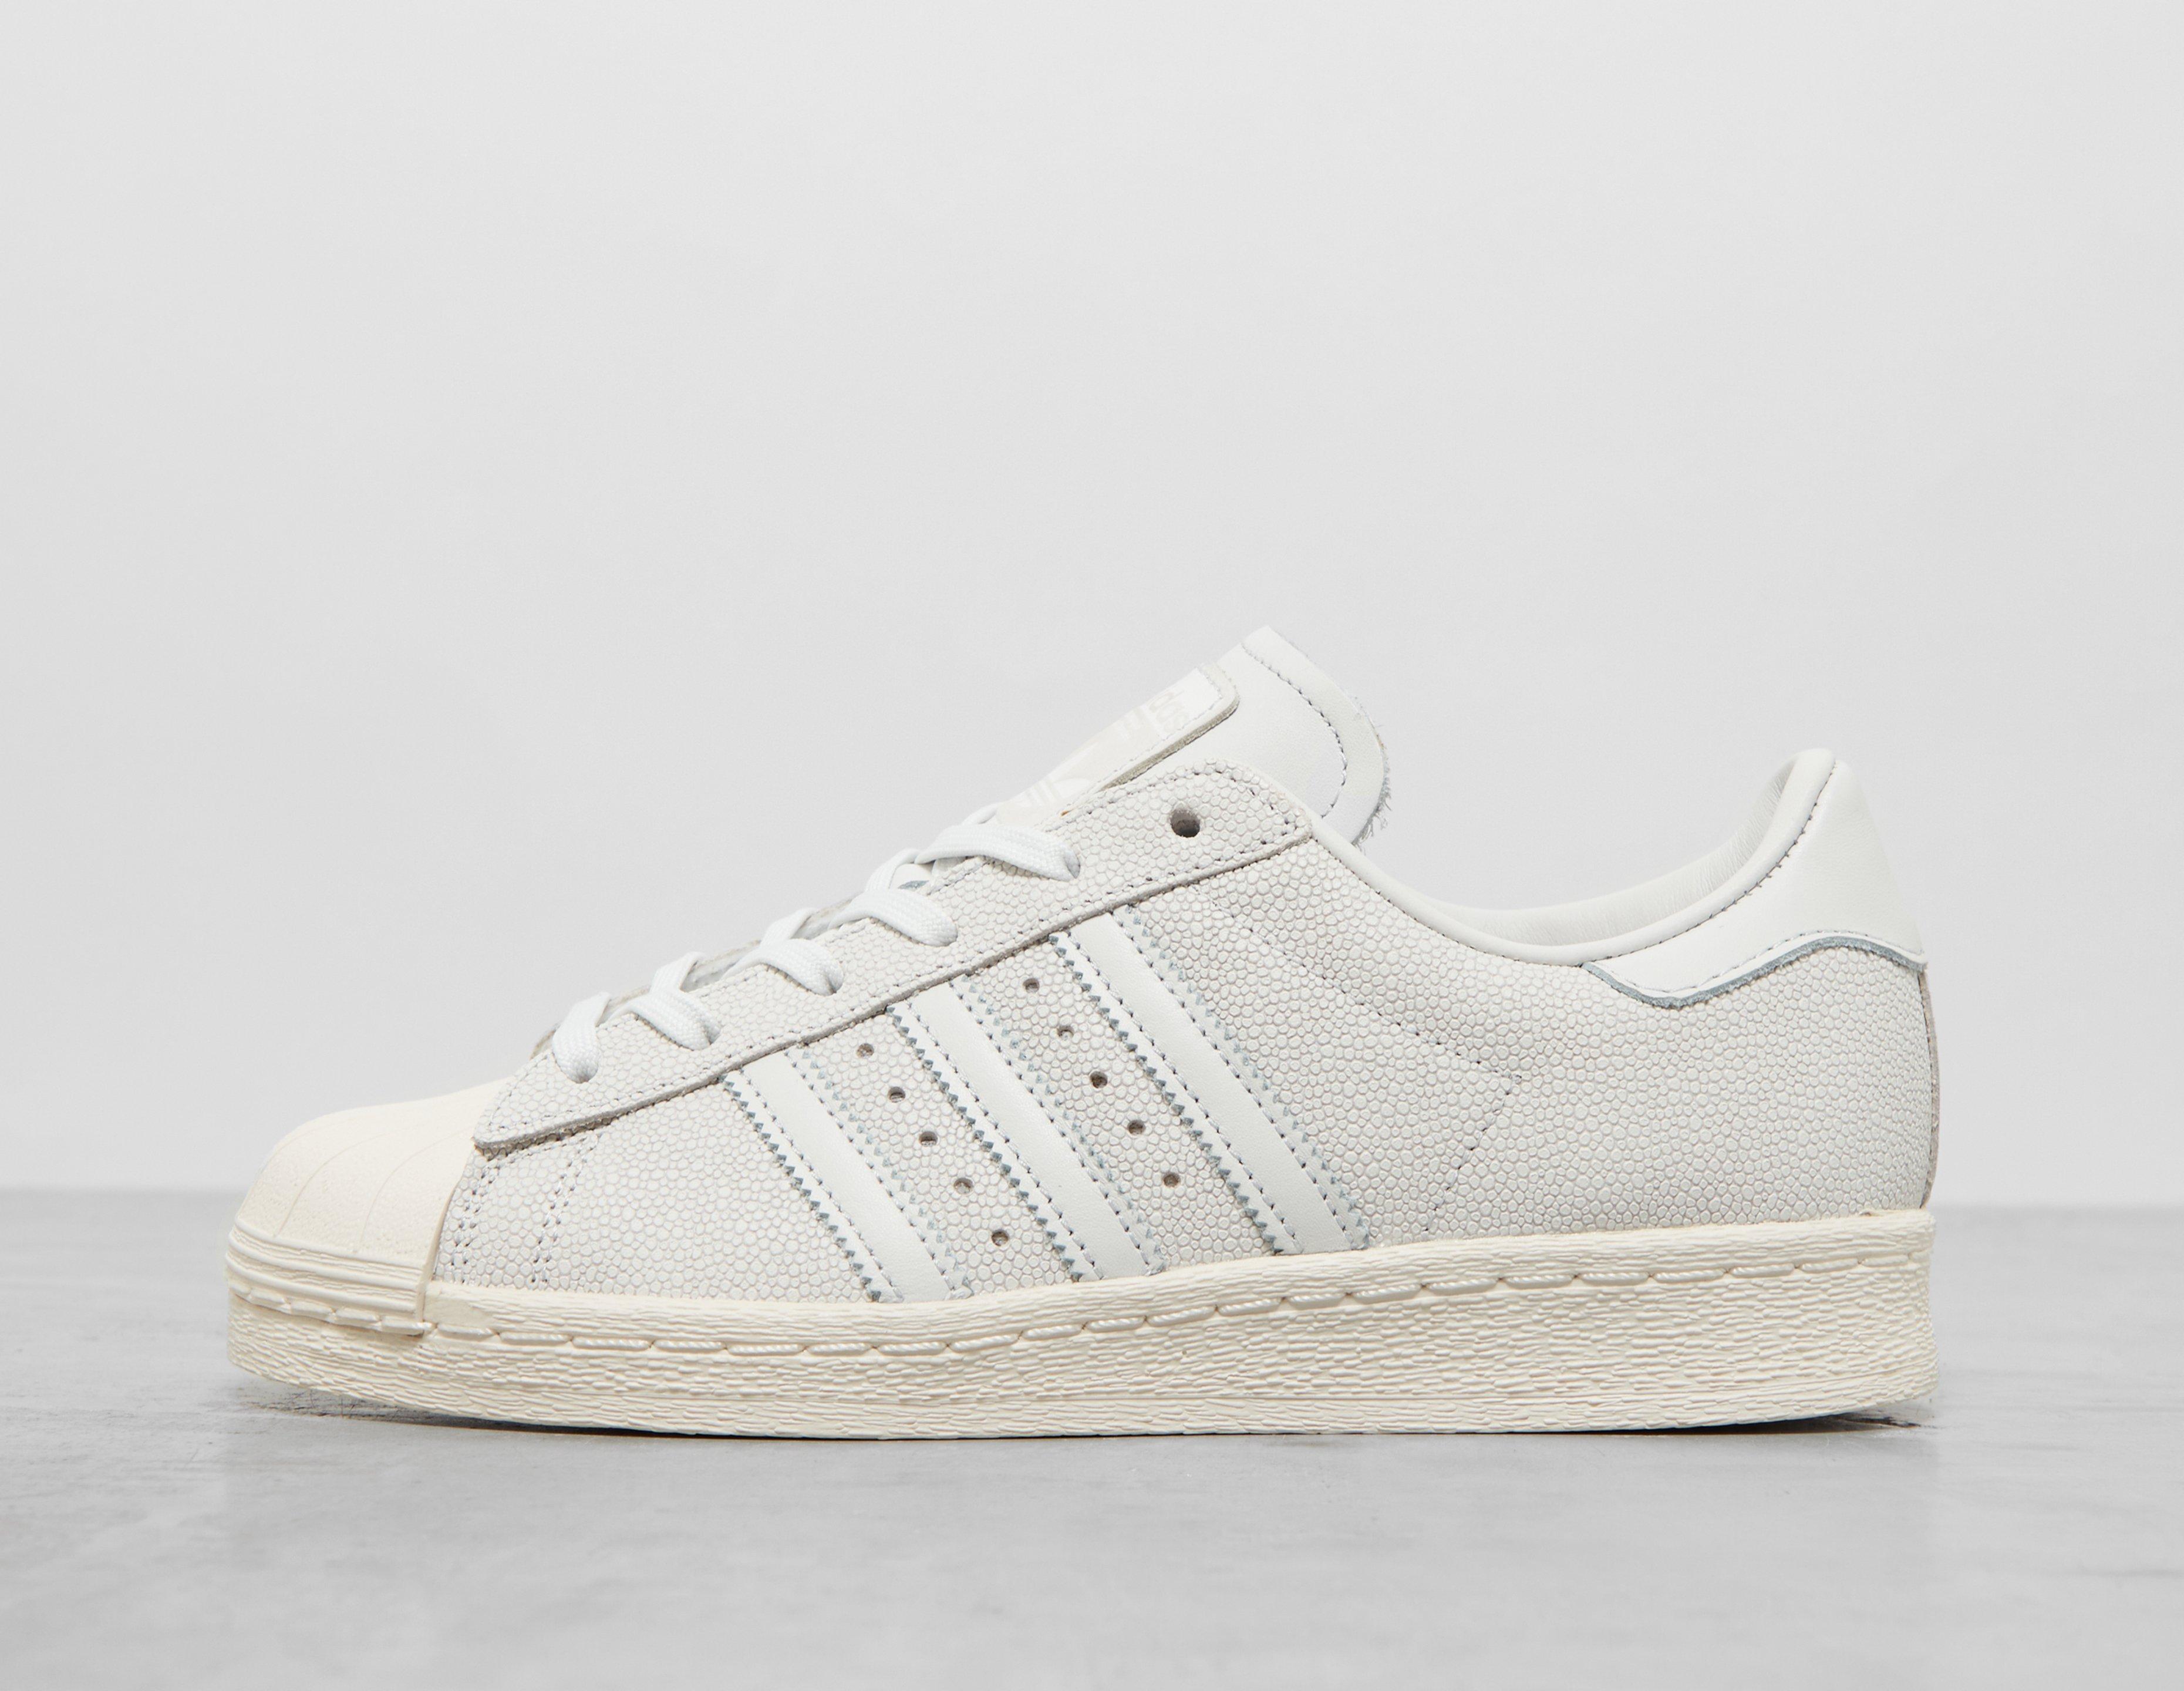 adidas | pack with piping HealthdesignShops Originals adidas originals Superstar adicolor champs White Women\'s commercial | 82 x